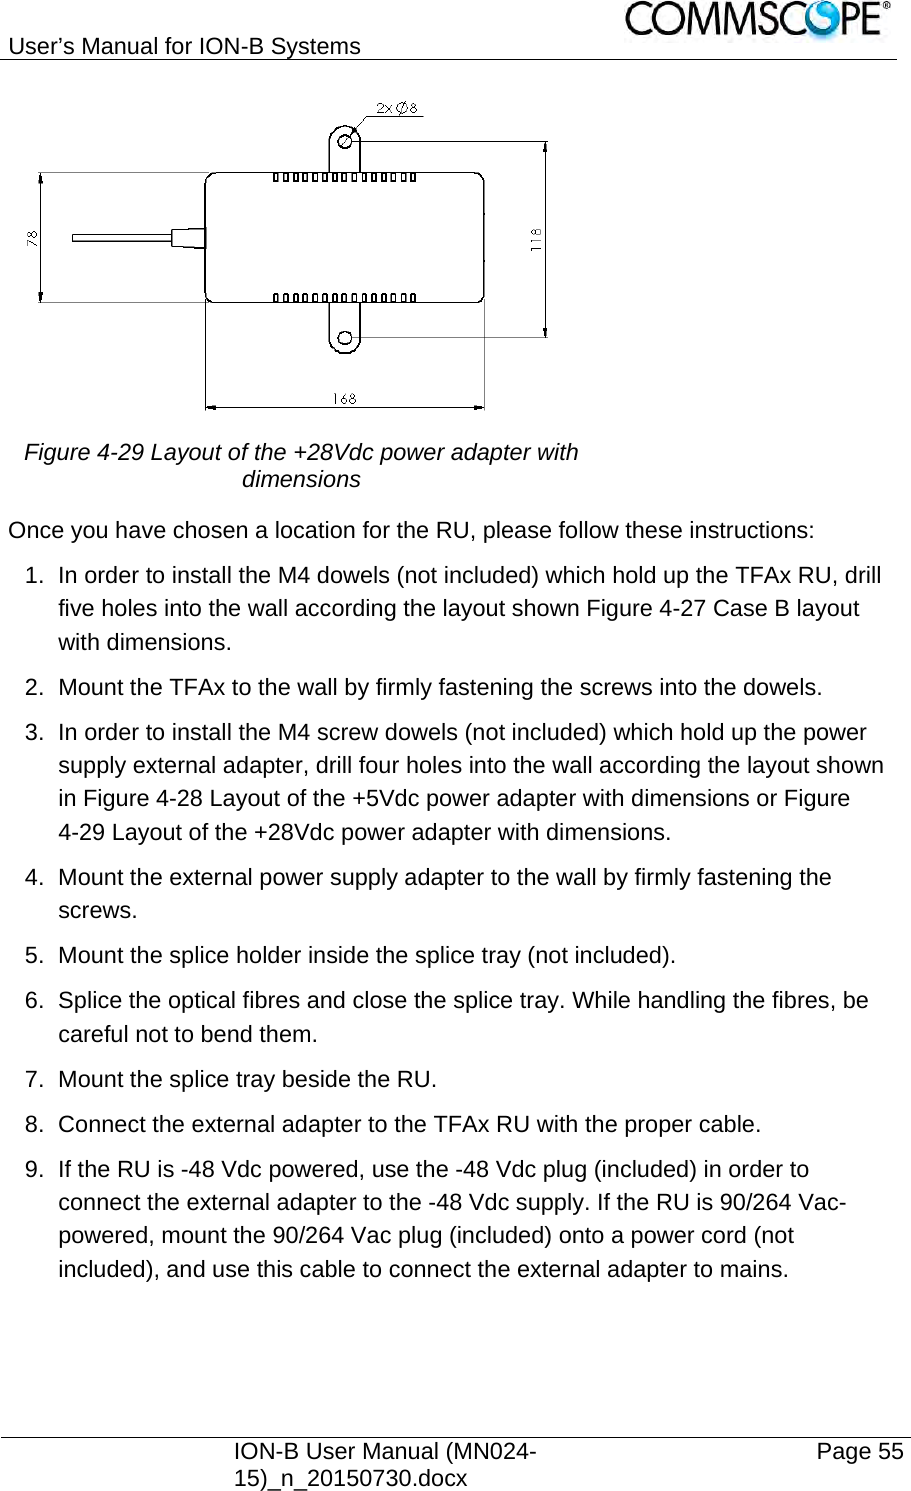 User’s Manual for ION-B Systems    ION-B User Manual (MN024-15)_n_20150730.docx  Page 55 Figure 4-29 Layout of the +28Vdc power adapter with dimensions Once you have chosen a location for the RU, please follow these instructions: 1.  In order to install the M4 dowels (not included) which hold up the TFAx RU, drill five holes into the wall according the layout shown Figure 4-27 Case B layout with dimensions. 2.  Mount the TFAx to the wall by firmly fastening the screws into the dowels. 3.  In order to install the M4 screw dowels (not included) which hold up the power supply external adapter, drill four holes into the wall according the layout shown in Figure 4-28 Layout of the +5Vdc power adapter with dimensions or Figure 4-29 Layout of the +28Vdc power adapter with dimensions. 4.  Mount the external power supply adapter to the wall by firmly fastening the screws. 5.  Mount the splice holder inside the splice tray (not included). 6.  Splice the optical fibres and close the splice tray. While handling the fibres, be careful not to bend them. 7.  Mount the splice tray beside the RU. 8.  Connect the external adapter to the TFAx RU with the proper cable. 9.  If the RU is -48 Vdc powered, use the -48 Vdc plug (included) in order to connect the external adapter to the -48 Vdc supply. If the RU is 90/264 Vac-powered, mount the 90/264 Vac plug (included) onto a power cord (not included), and use this cable to connect the external adapter to mains. 